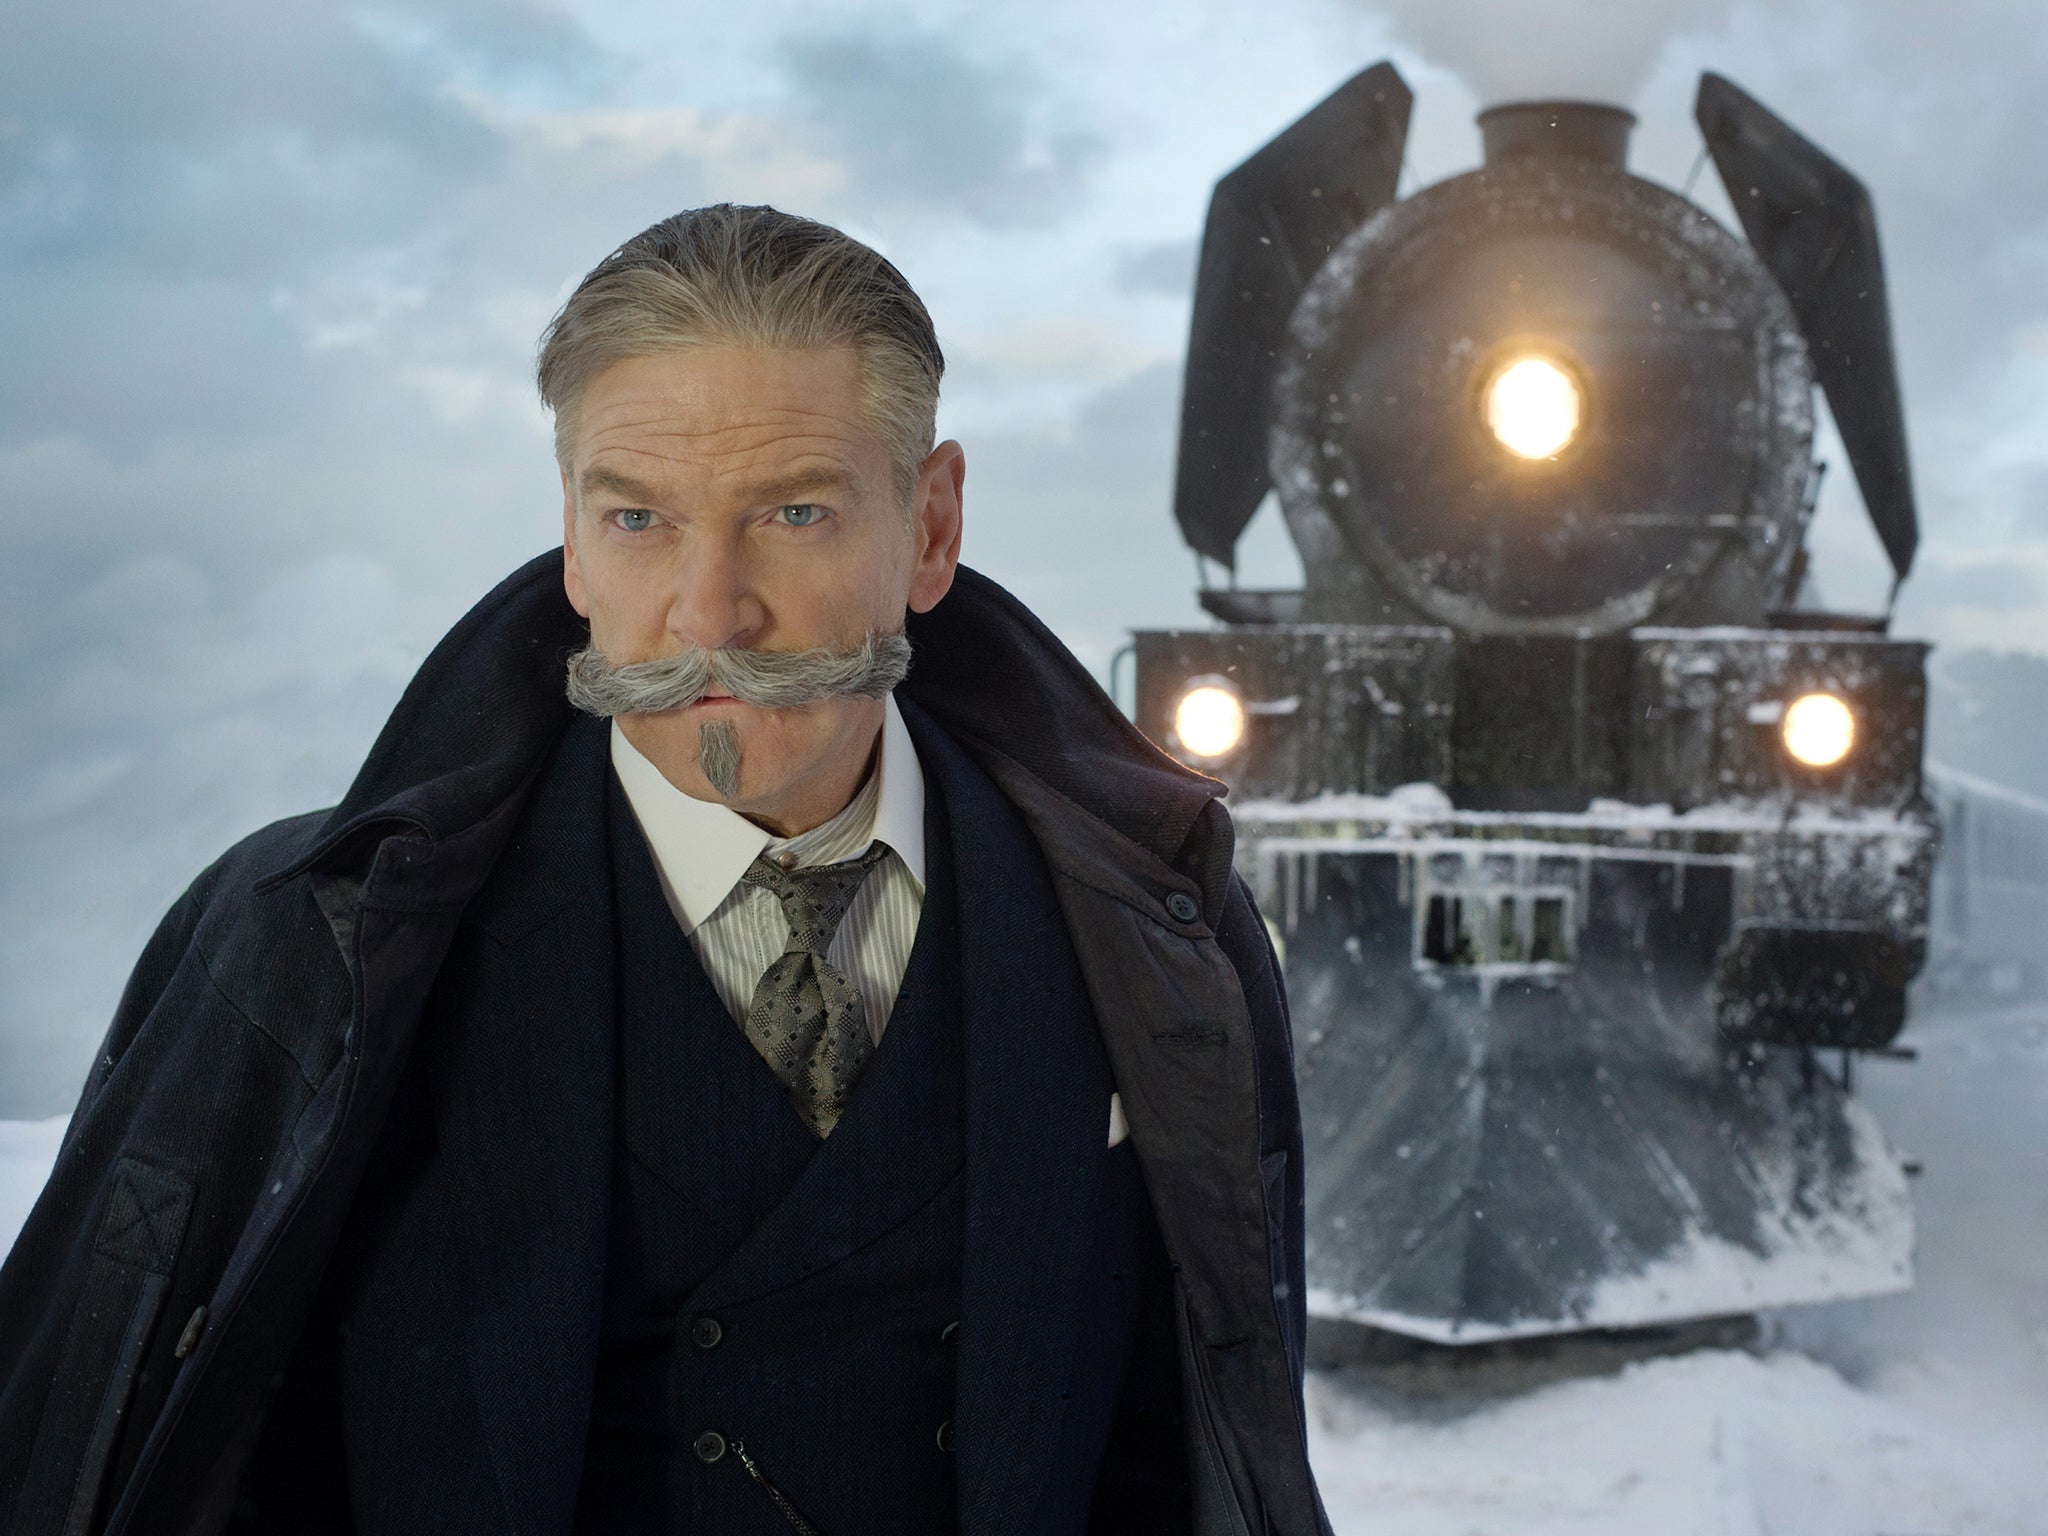 Kenneth Branagh as Hercule Poirot with his moustache in 'Murder on the Orient Express'